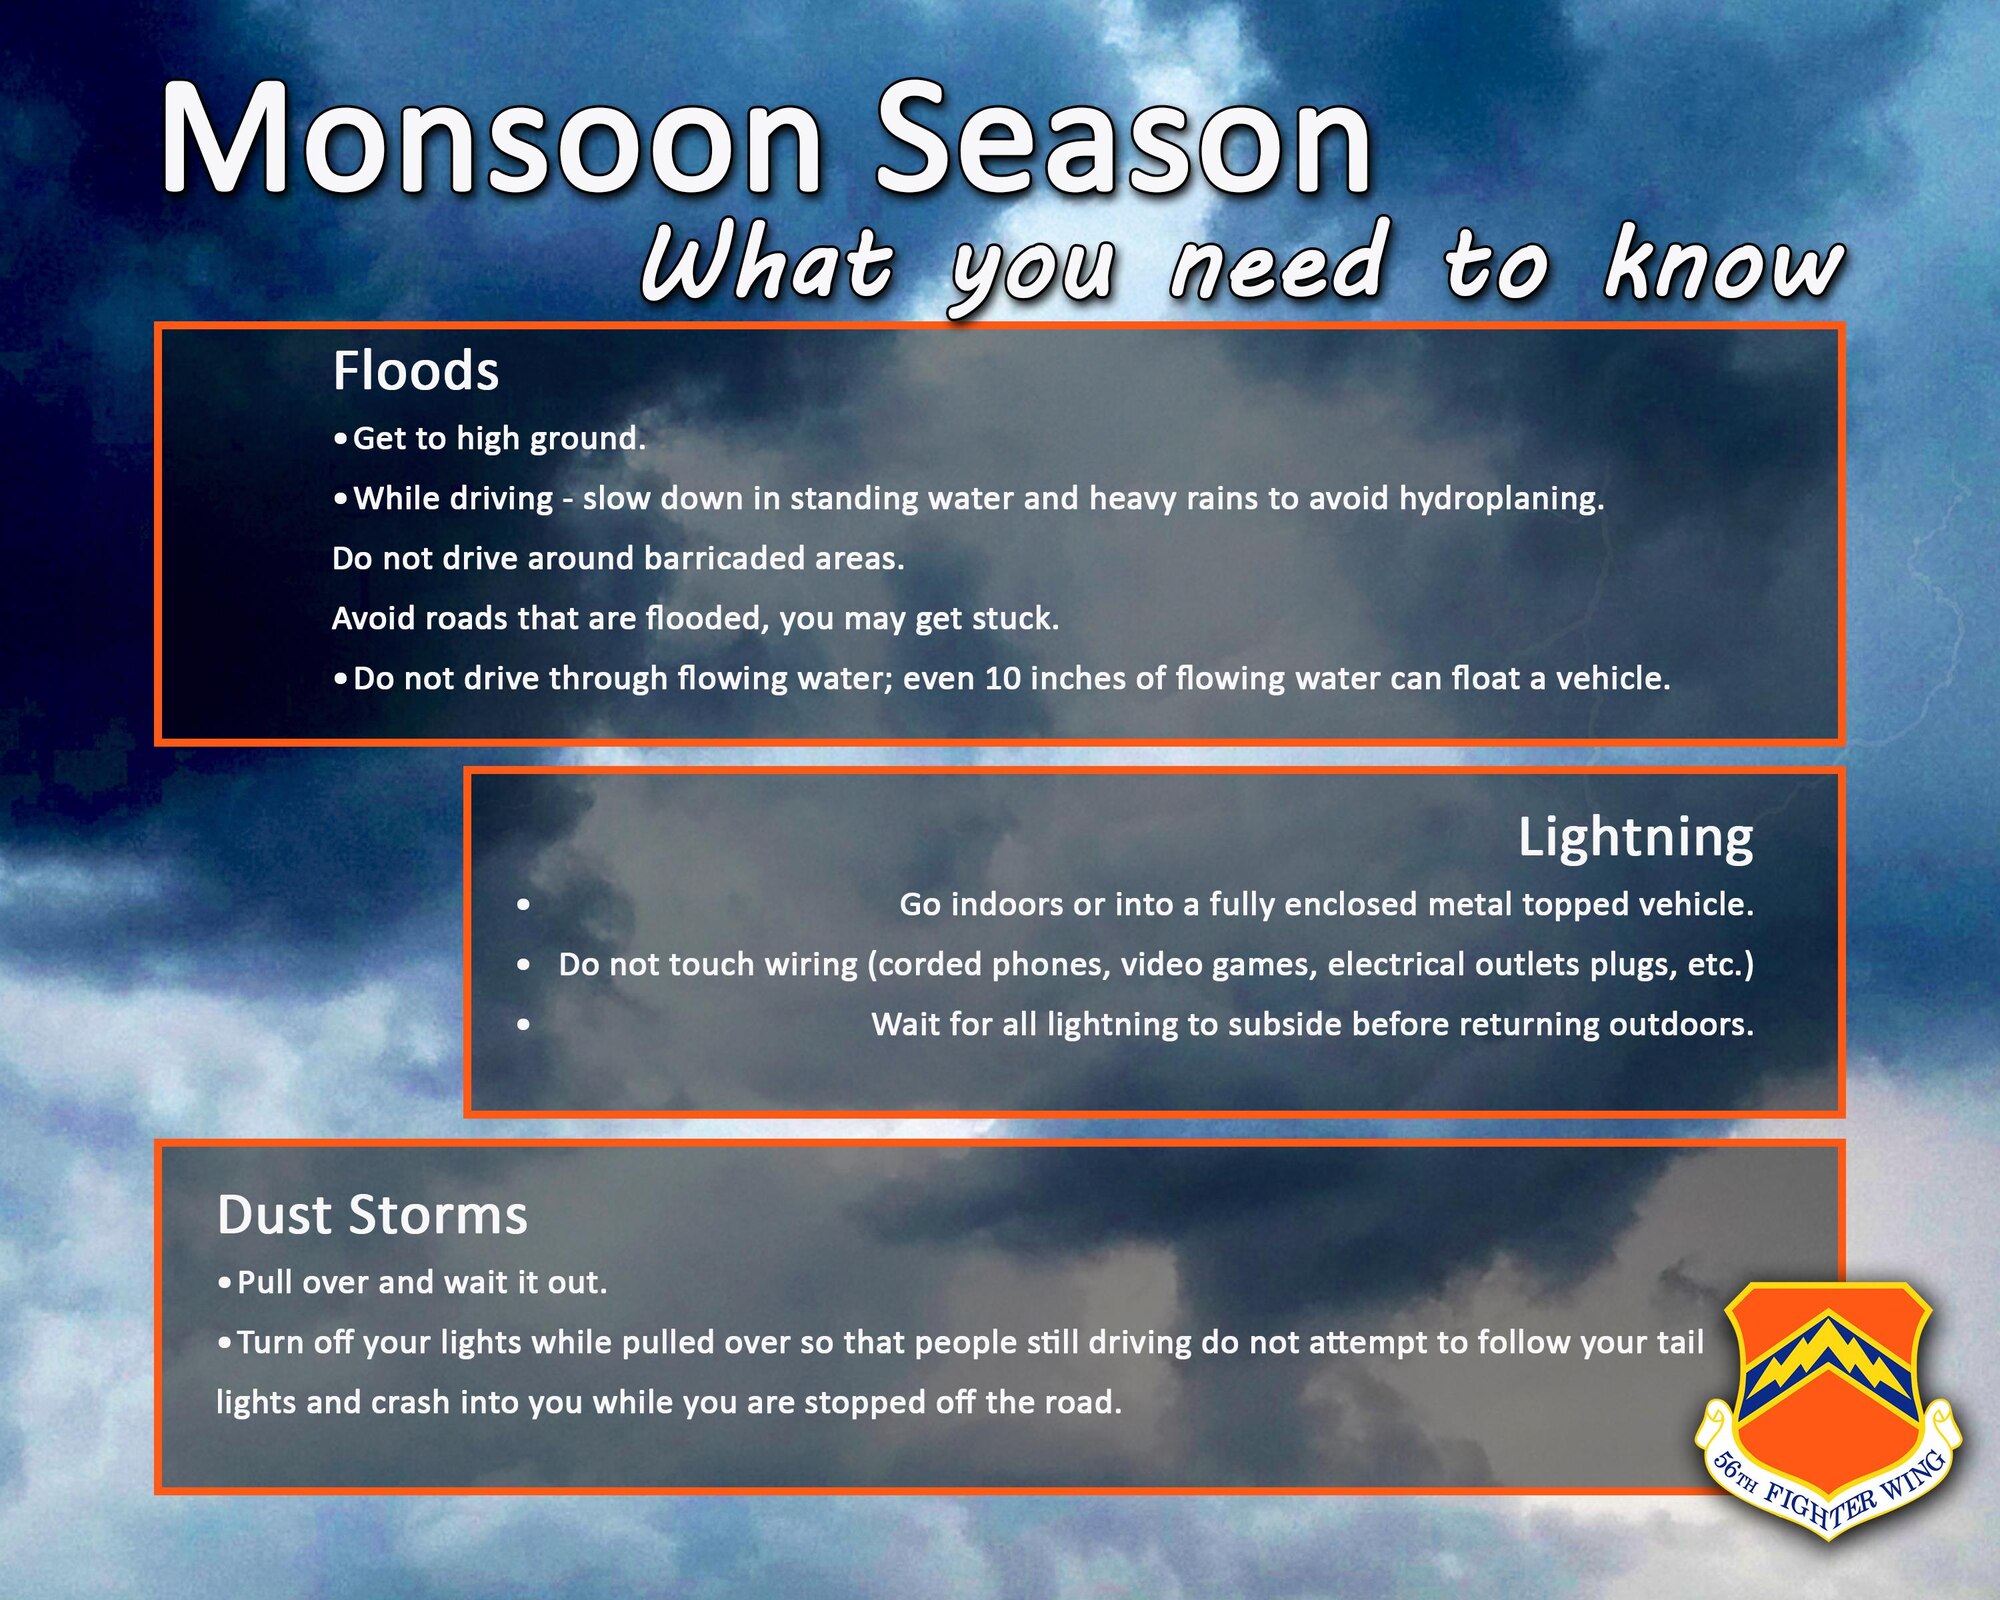 June 15th officially marks the beginning of monsoon season in Arizona bringing a higher risk of severe thunderstorms, flooding, dust storms and high winds affecting the mission at Luke AFB and surrounding communities.